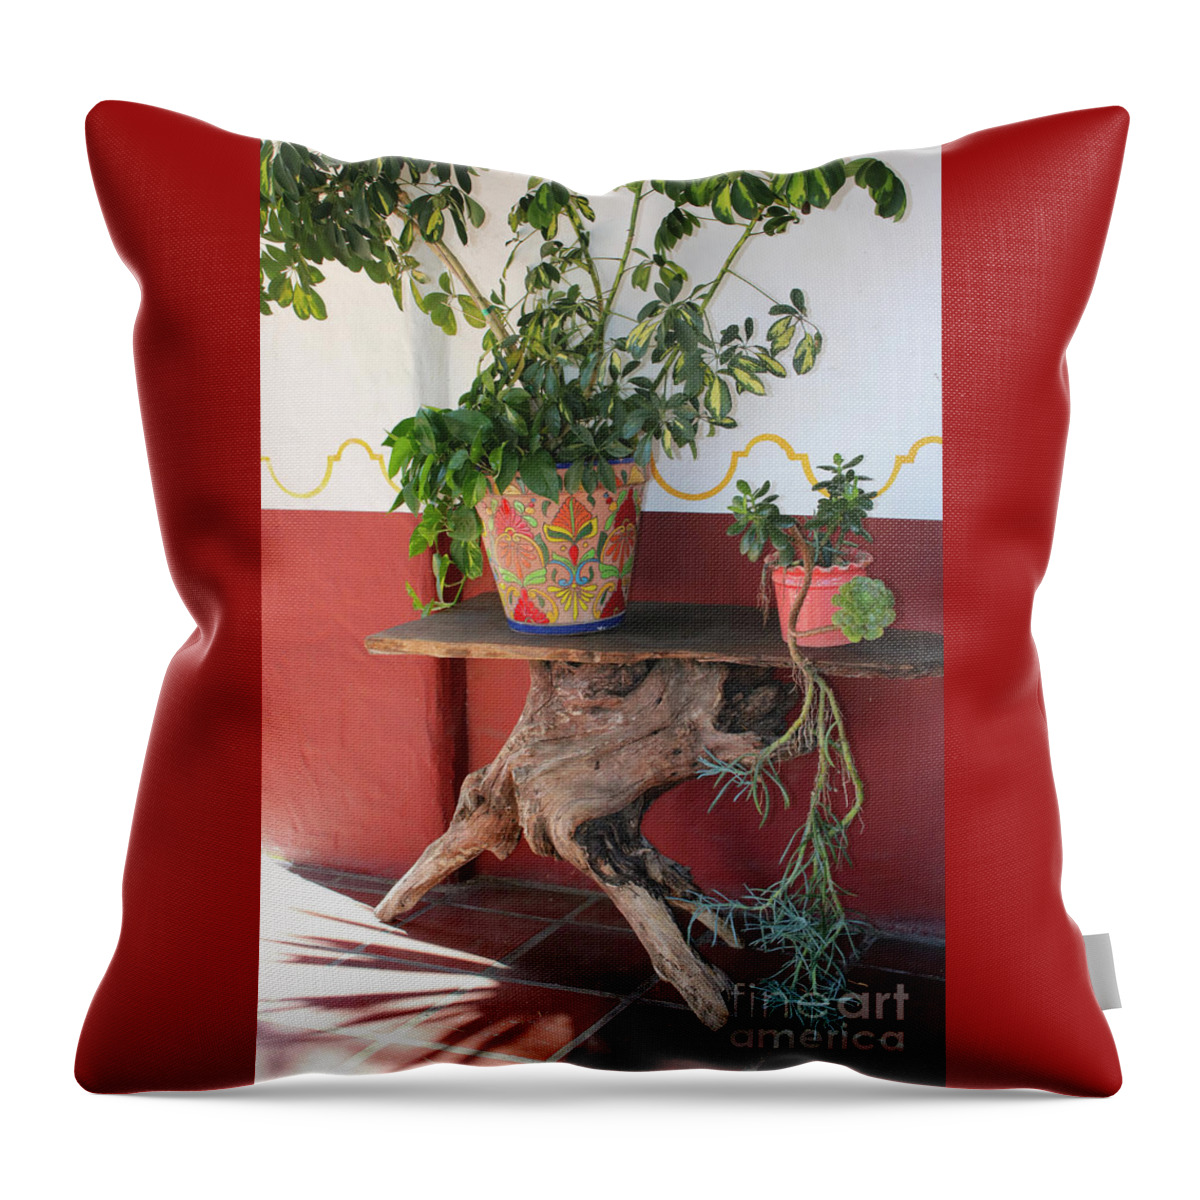 Southwest Throw Pillow featuring the photograph Southwest Table by Carol Groenen